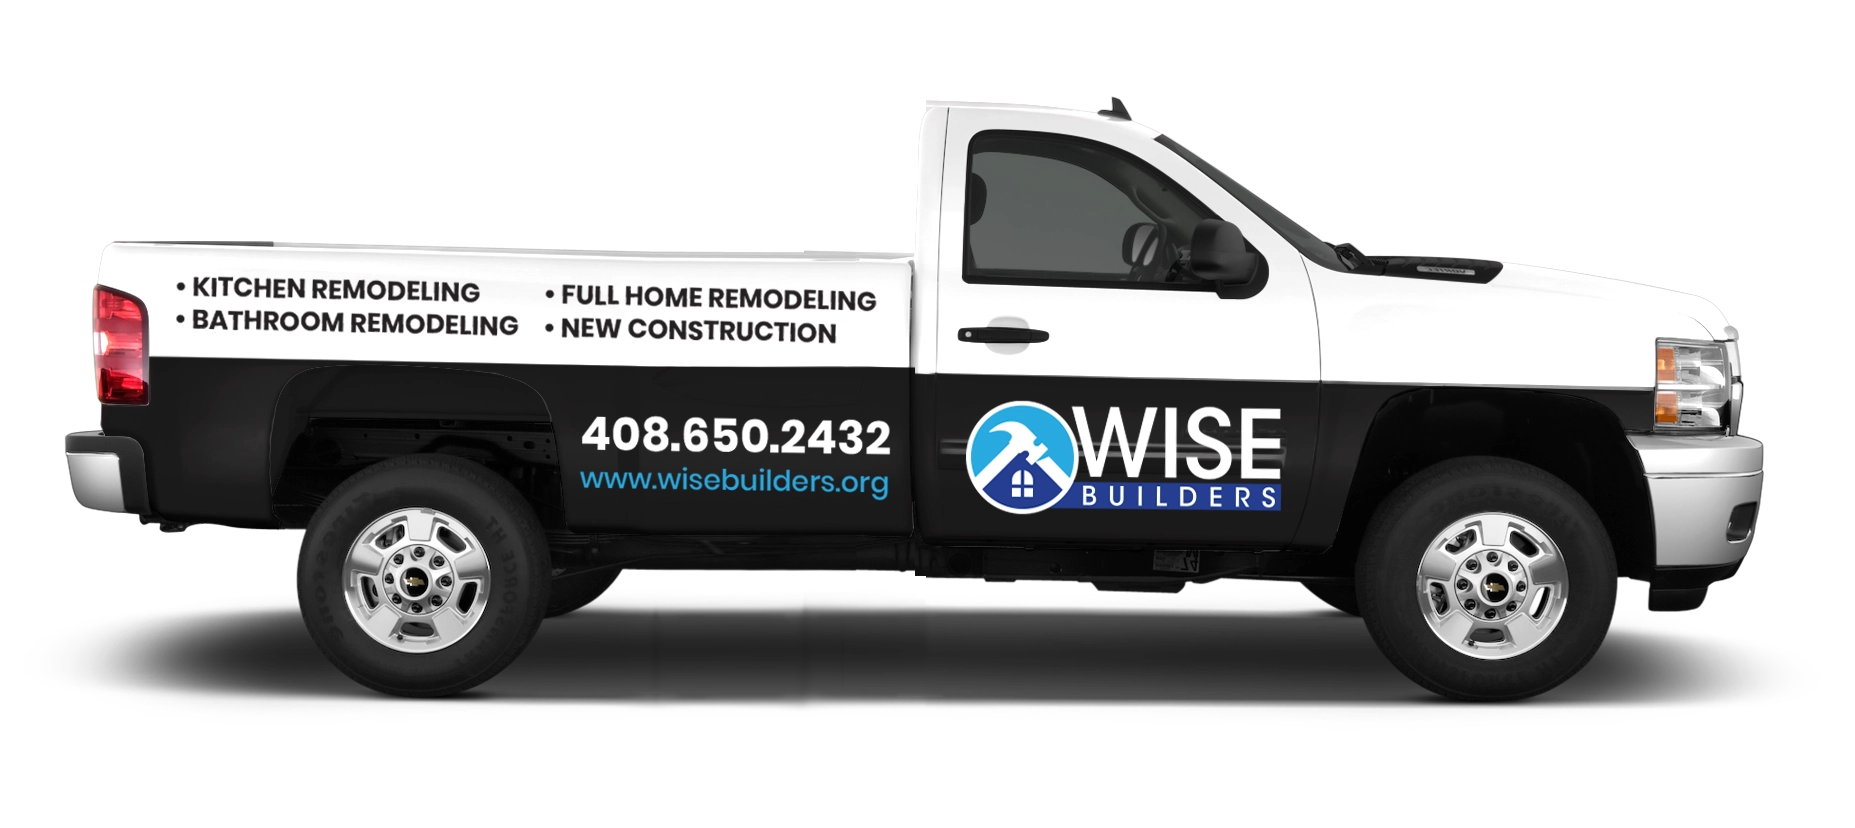 Wise Builders truck with brand logo and company information